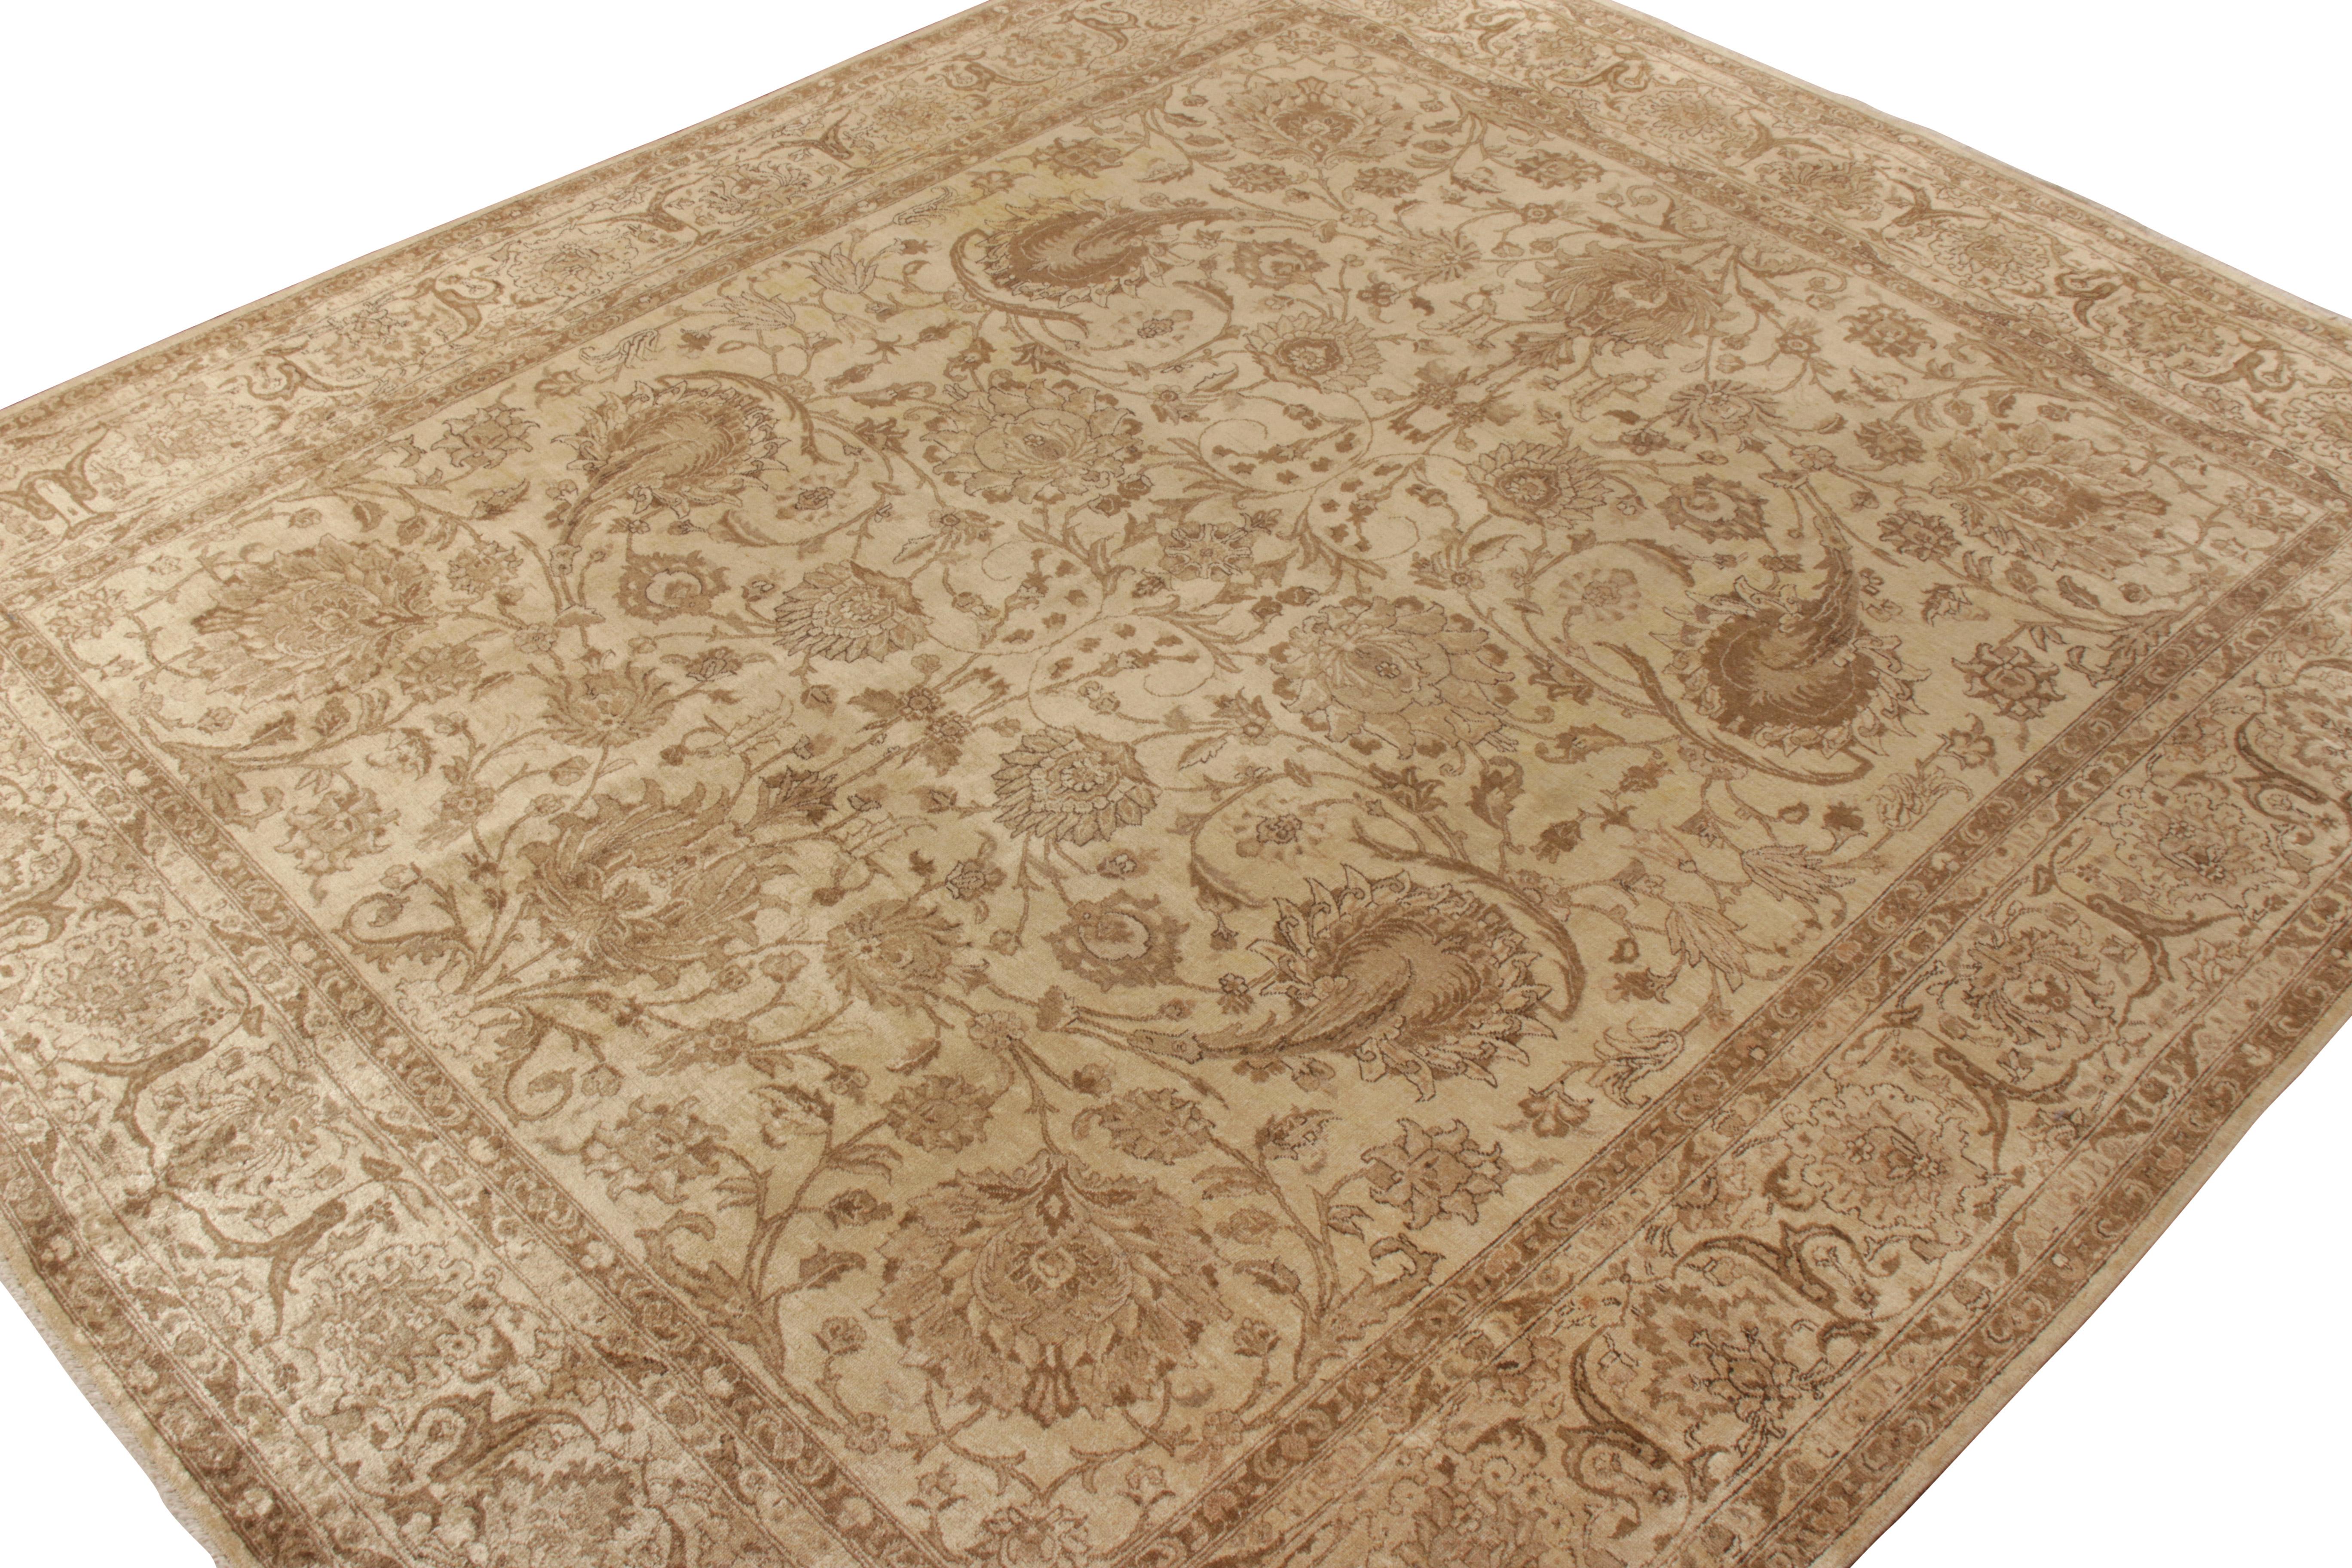 Hand-Knotted Antique Persian Tabriz Rug in All over Beige Brown Floral Pattern by Rug & Kilim For Sale